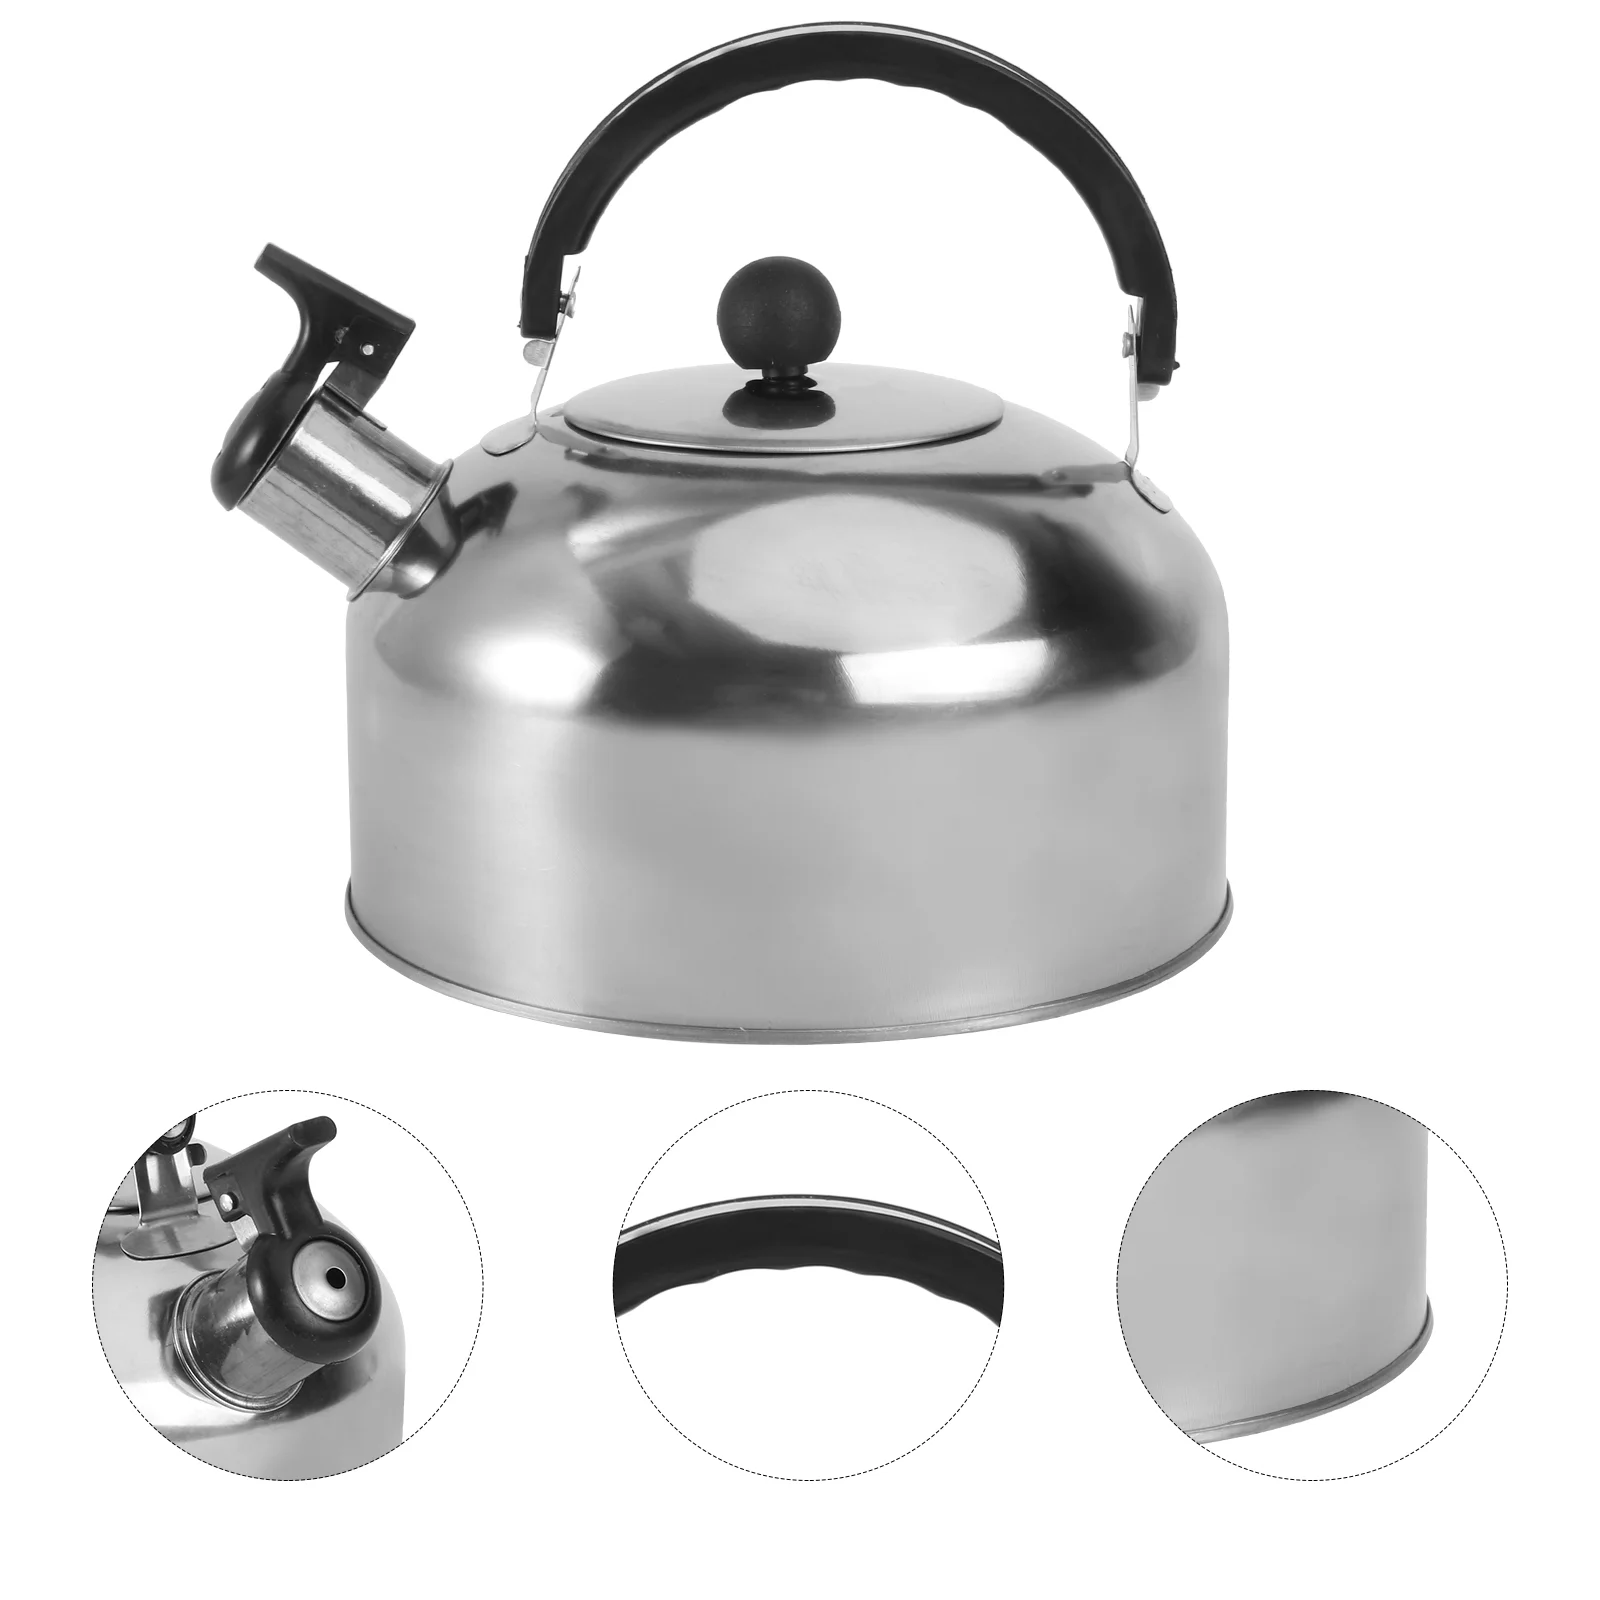 

Kettle Tea Whistling Teapot Stovetop Stove Water Steel Stainless Boiling Gas Pot Coffee Kettles Pots Camping Boiled Hot Heating